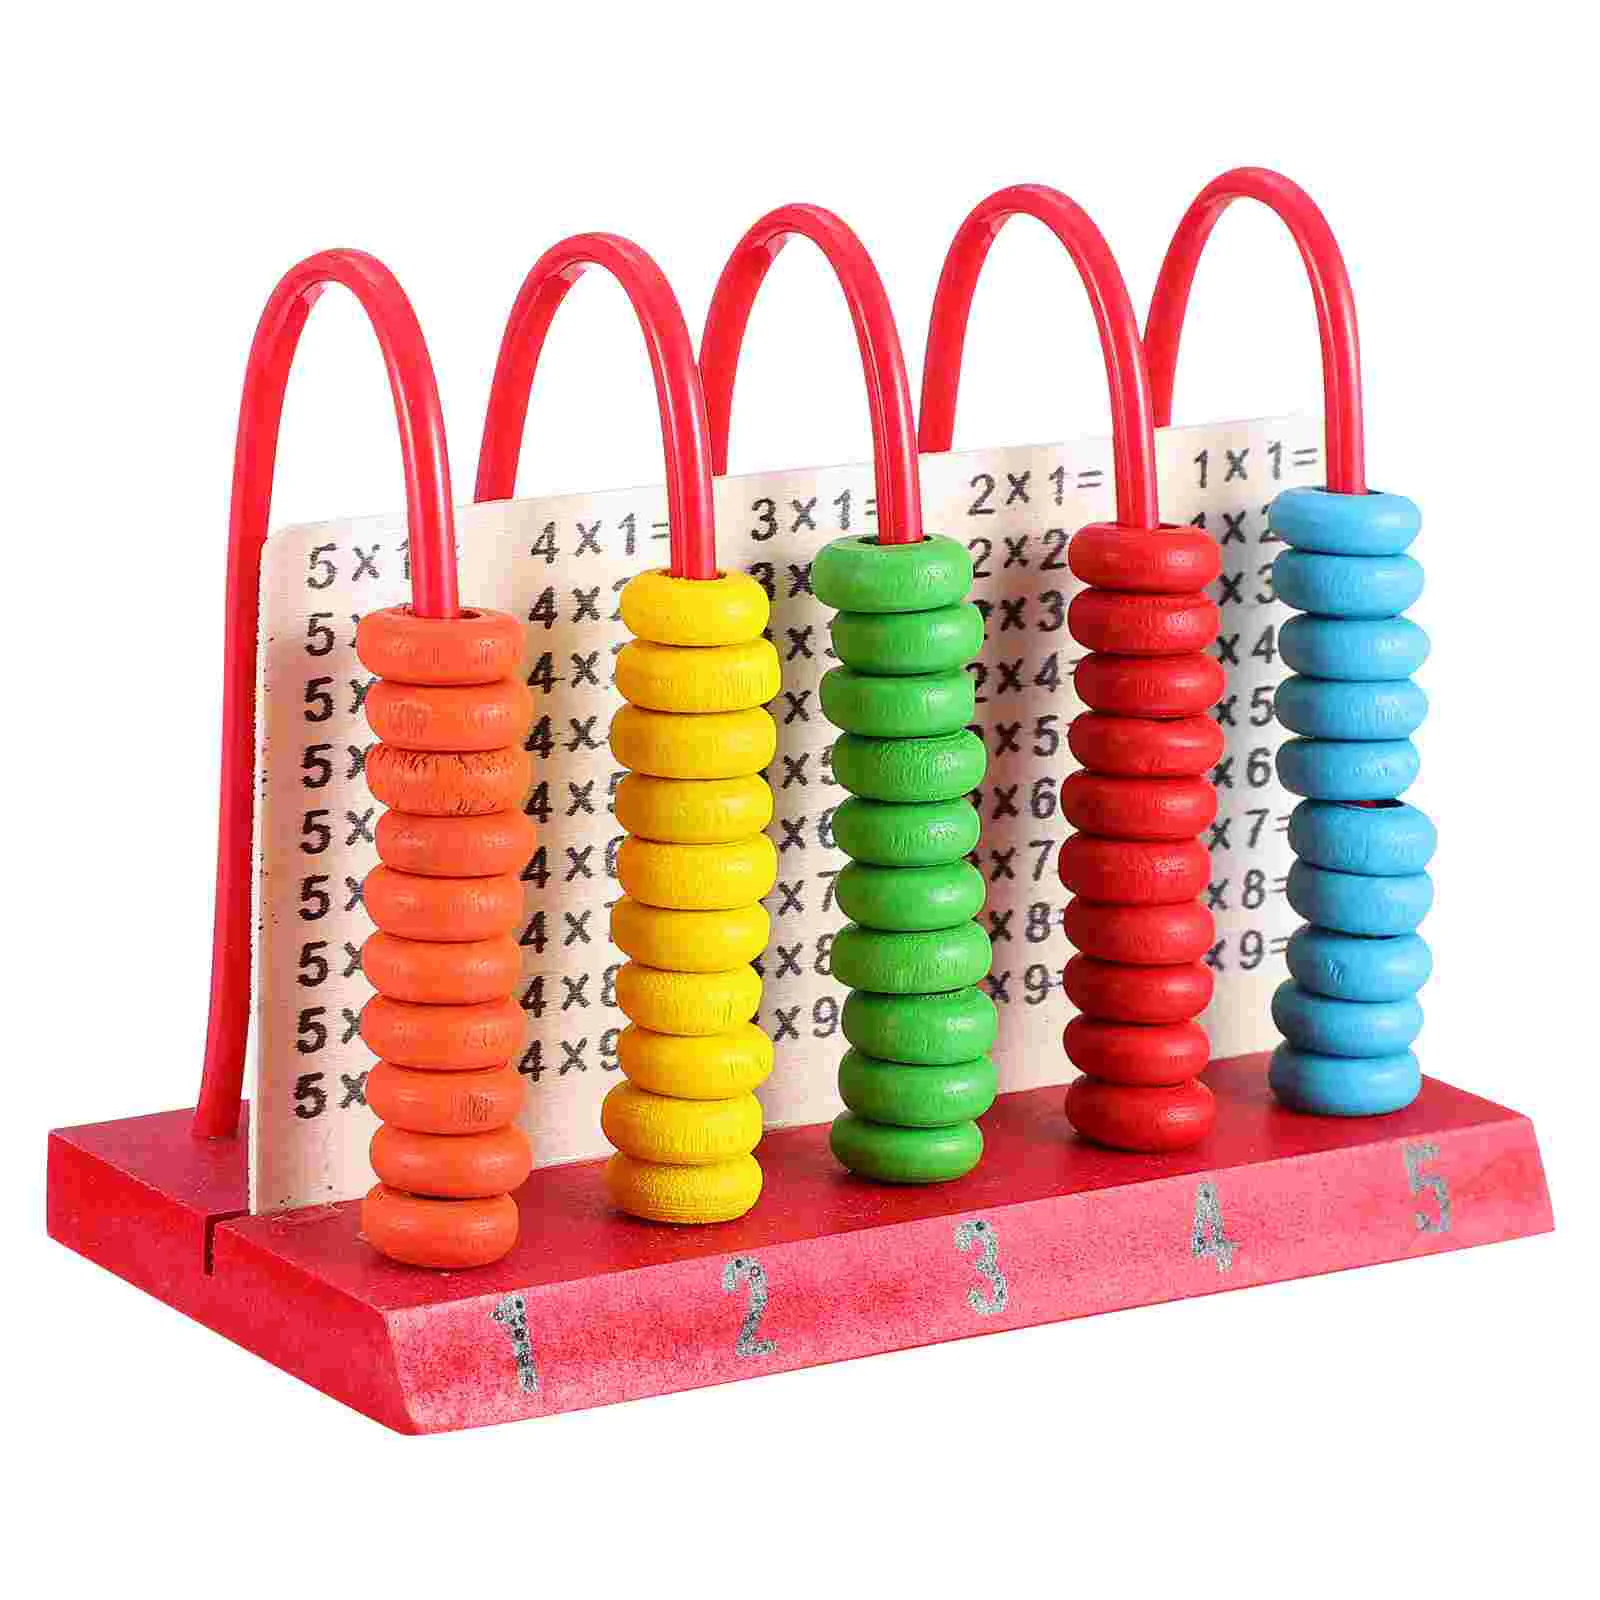 

Abacus Math Kids Toys Counting Toy Beads Wooden Children Educational Tool 3 Handmade Calculating Toddlers Calculation